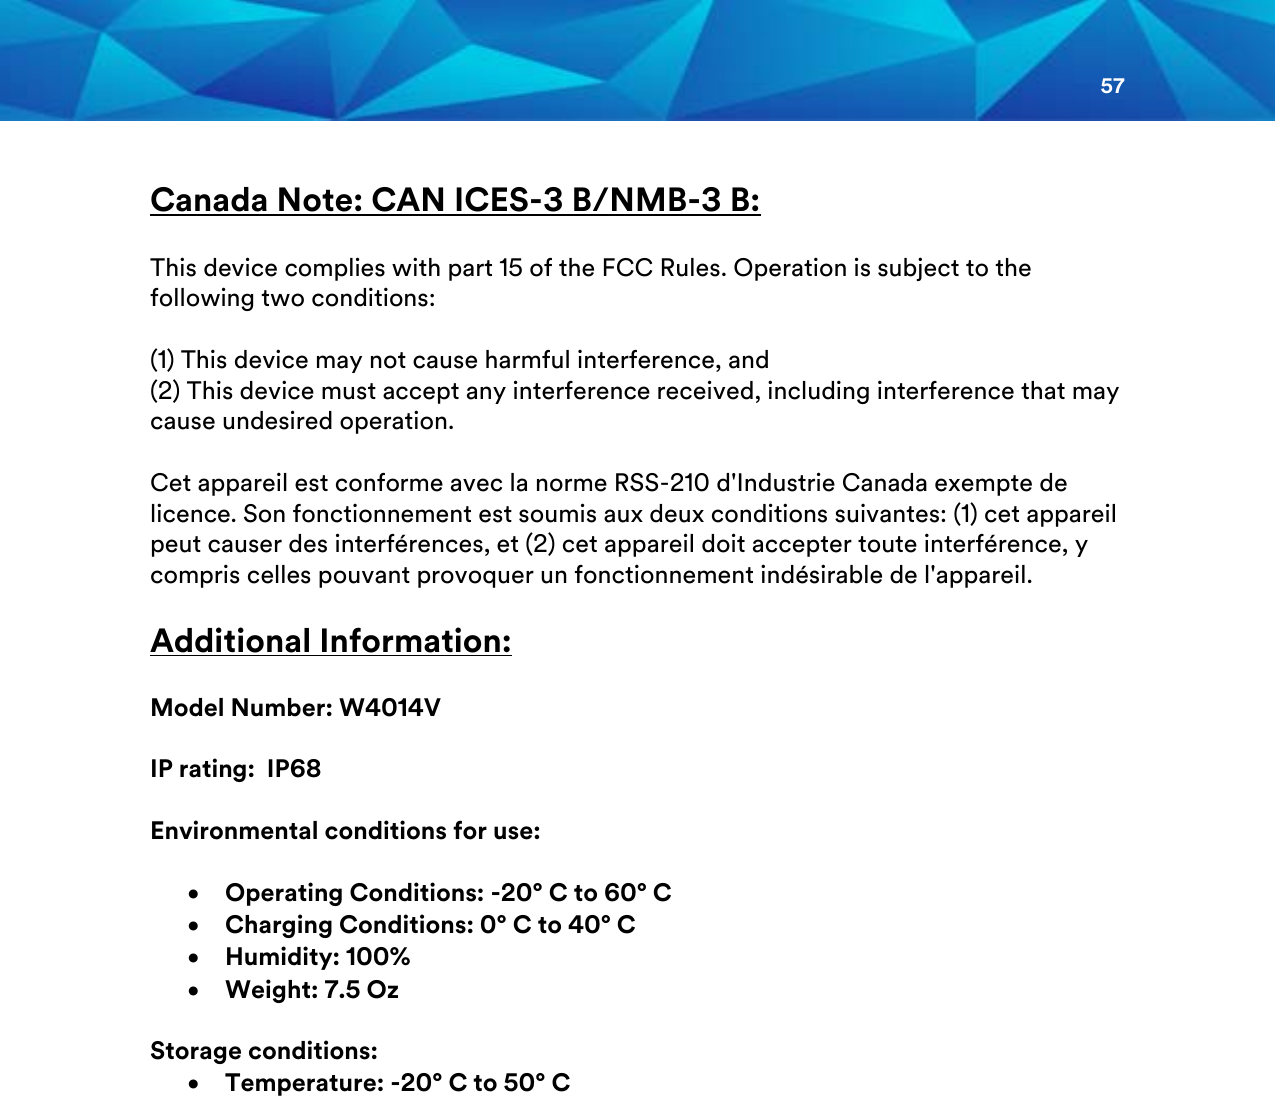 57   Canada Note: CAN ICES-3 B/NMB-3 B:  This device complies with part 15 of the FCC Rules. Operation is subject to the following two conditions:  (1) This device may not cause harmful interference, and (2) This device must accept any interference received, including interference that may cause undesired operation.  Cet appareil est conforme avec la norme RSS-210 d&apos;Industrie Canada exempte de licence. Son fonctionnement est soumis aux deux conditions suivantes: (1) cet appareil peut causer des interférences, et (2) cet appareil doit accepter toute interférence, y compris celles pouvant provoquer un fonctionnement indésirable de l&apos;appareil.  Additional Information:  Model Number: W4014V  IP rating:  IP68  Environmental conditions for use:   • Operating Conditions: -20° C to 60° C • Charging Conditions: 0° C to 40° C • Humidity: 100% • Weight: 7.5 Oz  Storage conditions: • Temperature: -20° C to 50° C     